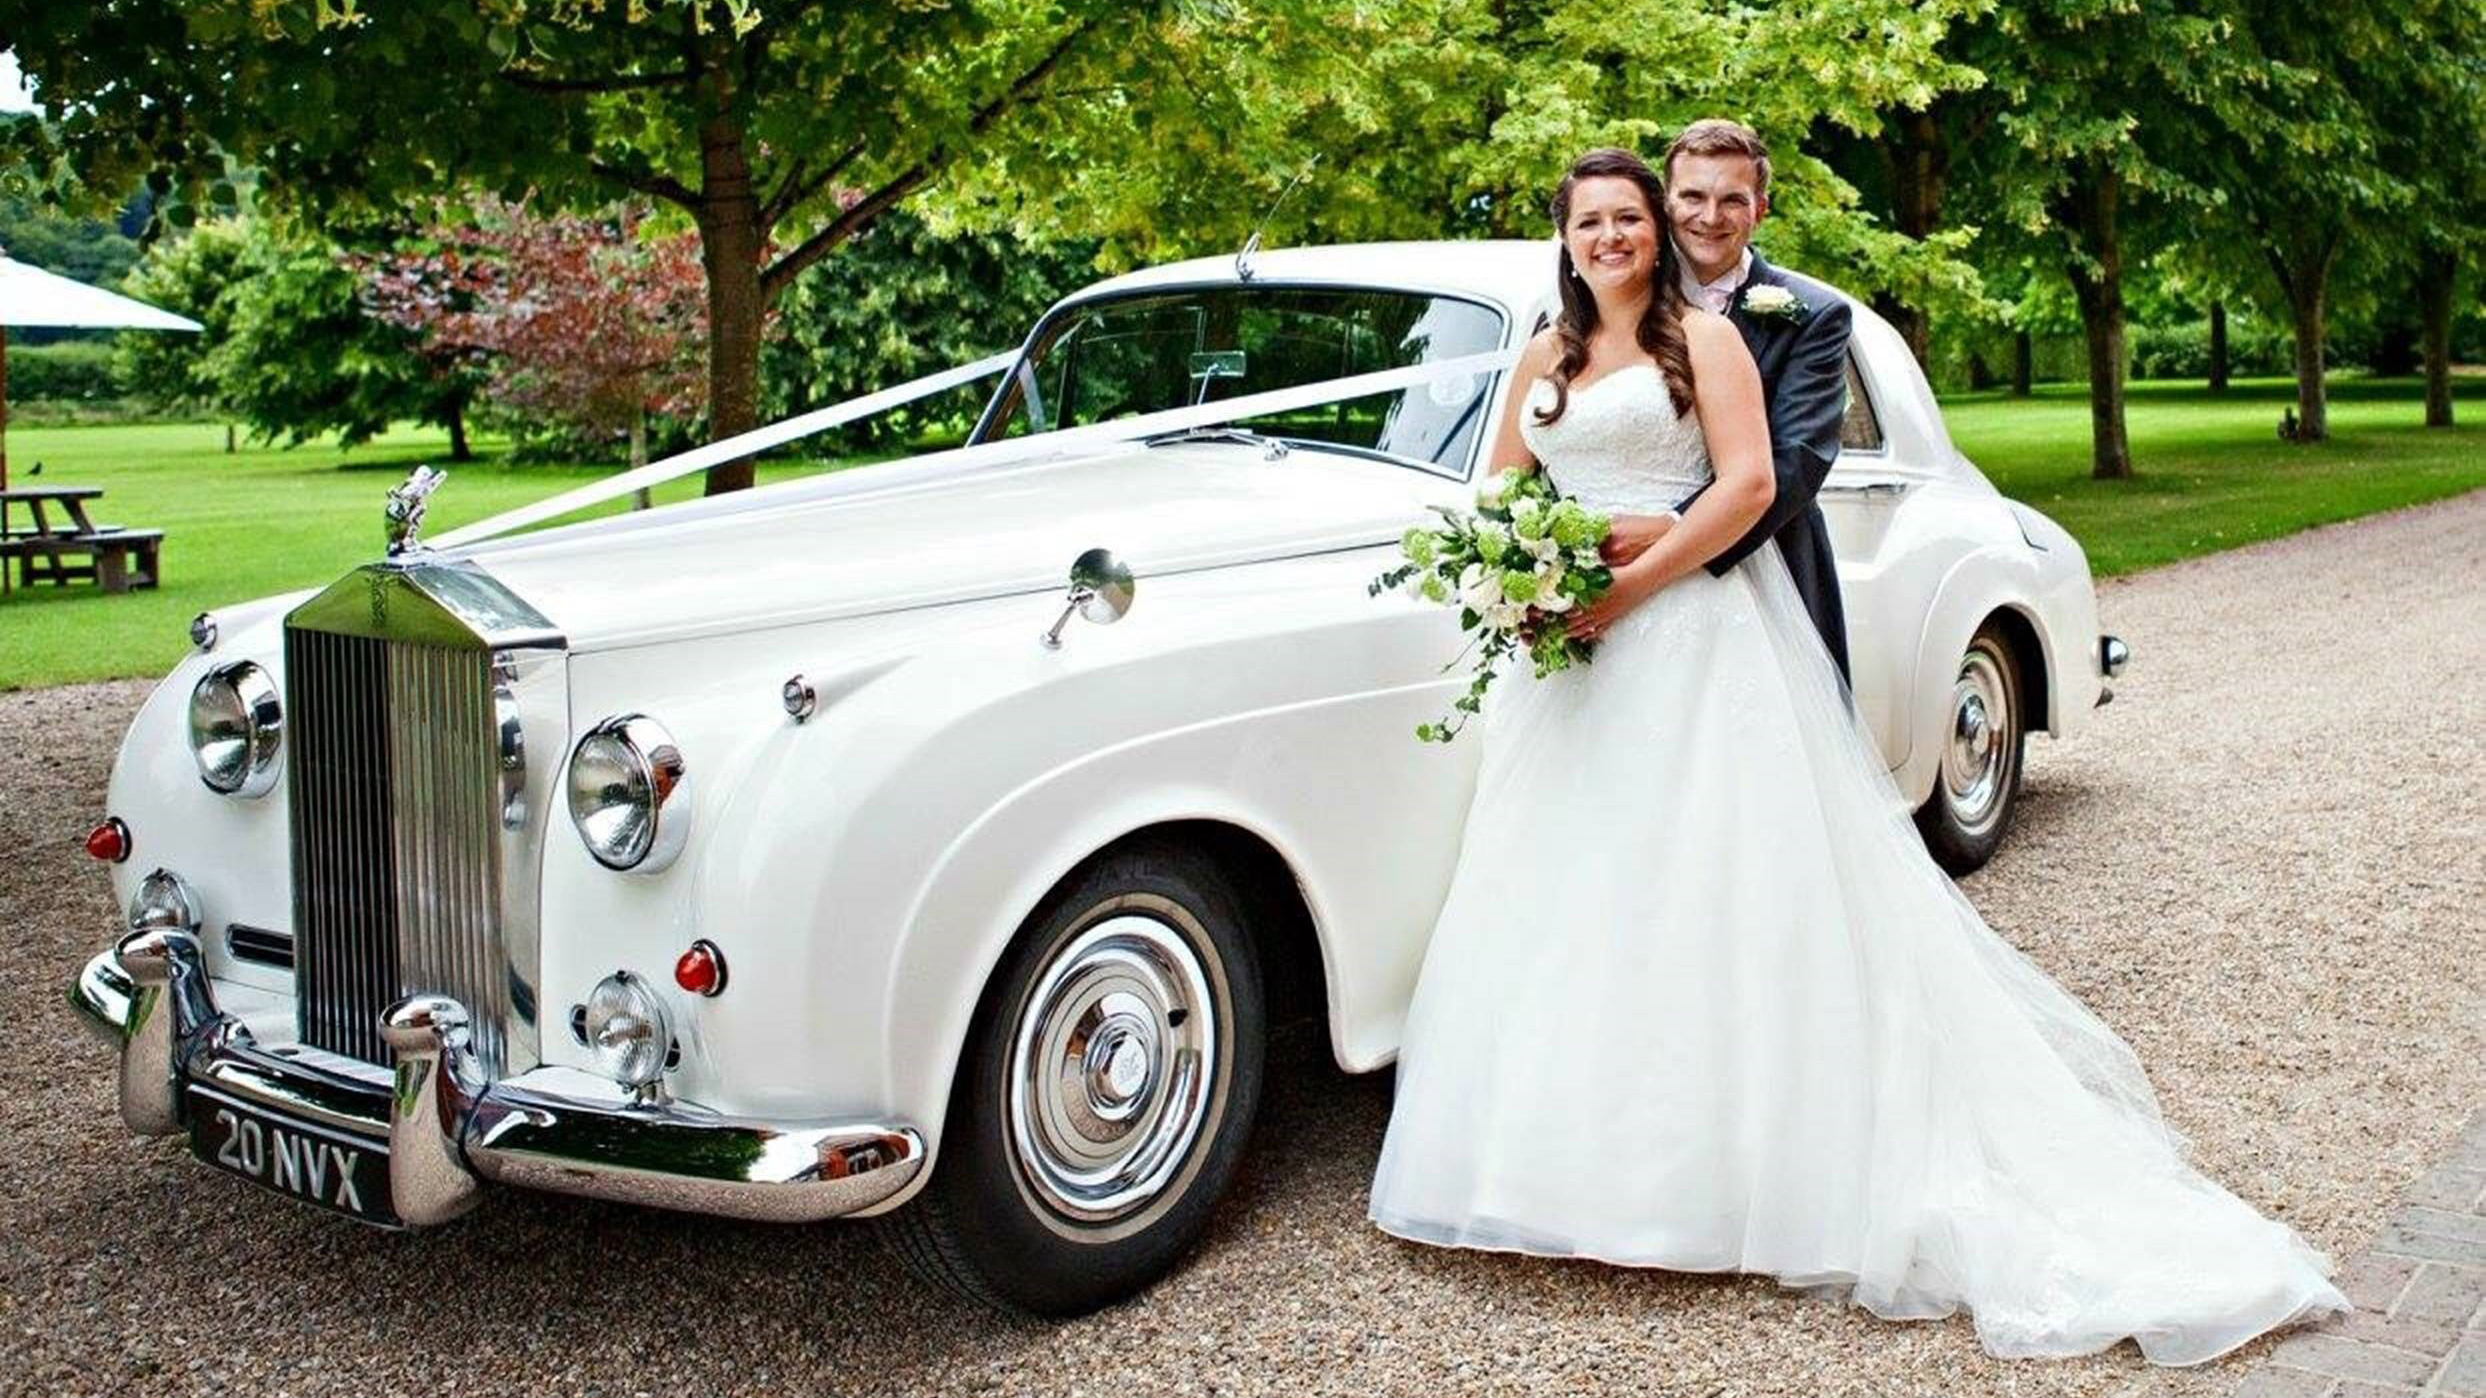 White Rolls-Royce Silver cloud decorated with ivory ribbons parked in the entrance of a wedding venue in Dunstable. Bride and Groom are standing by the vehicle. Groom is holding his Bride in his arms while she holds her bridal bouquet.